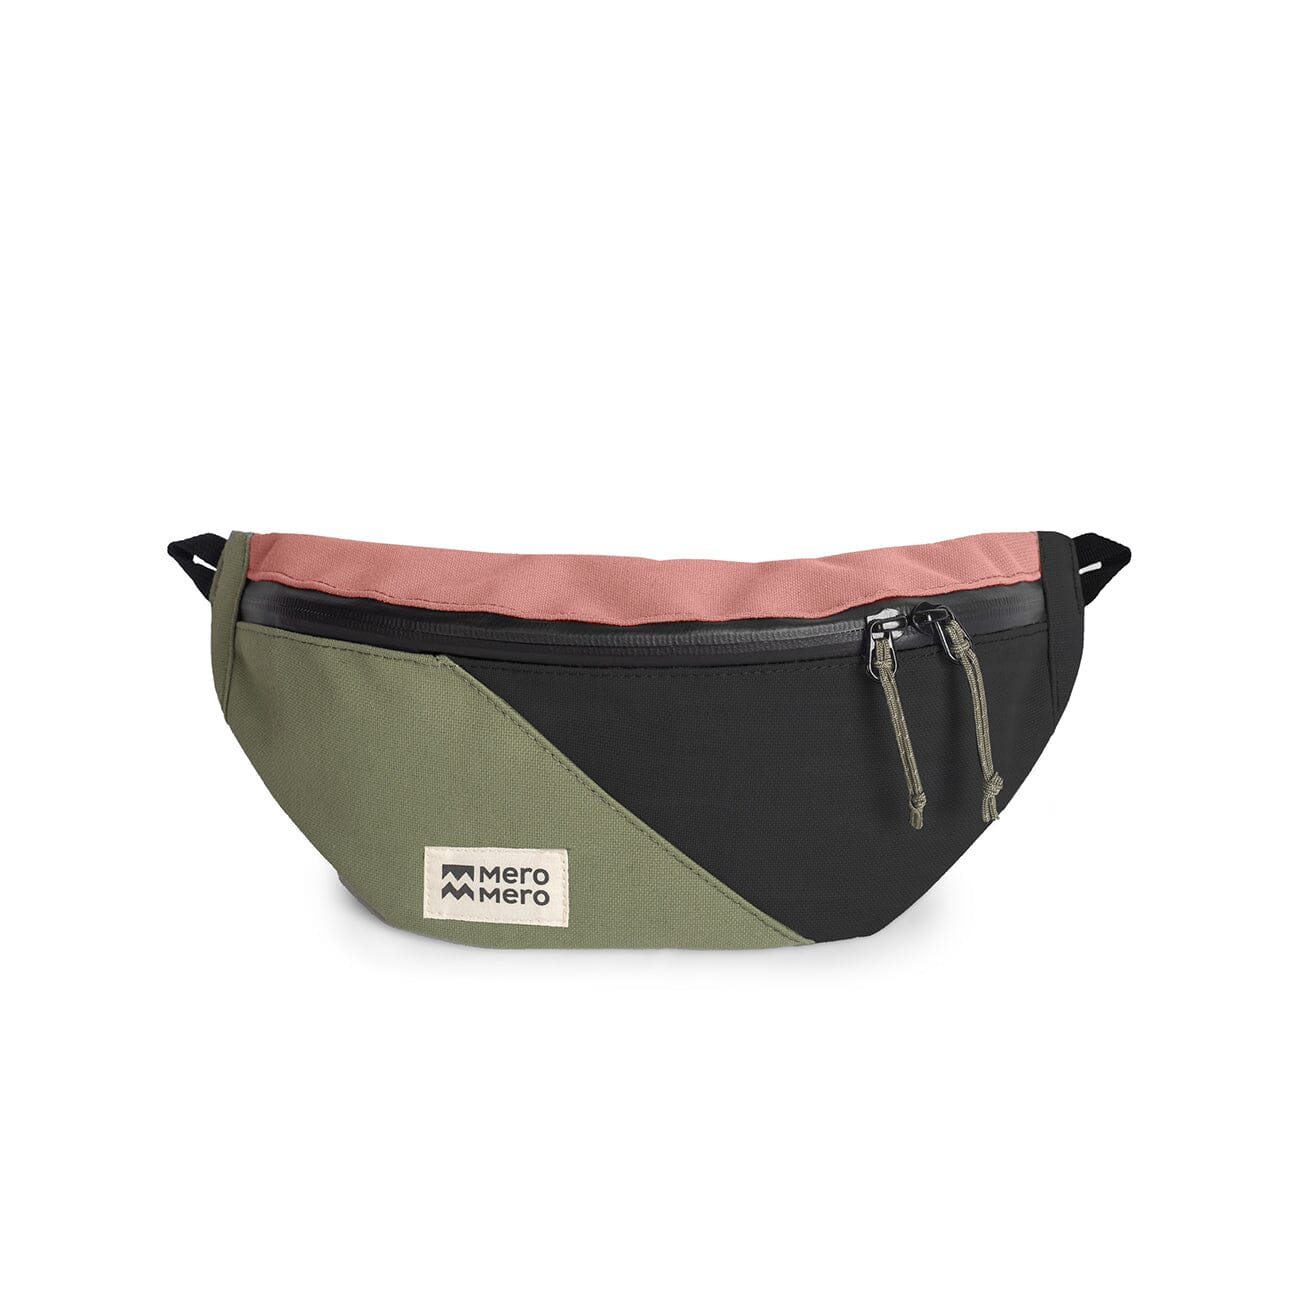 mero mero mini hoian small recycled fanny pack pink color front